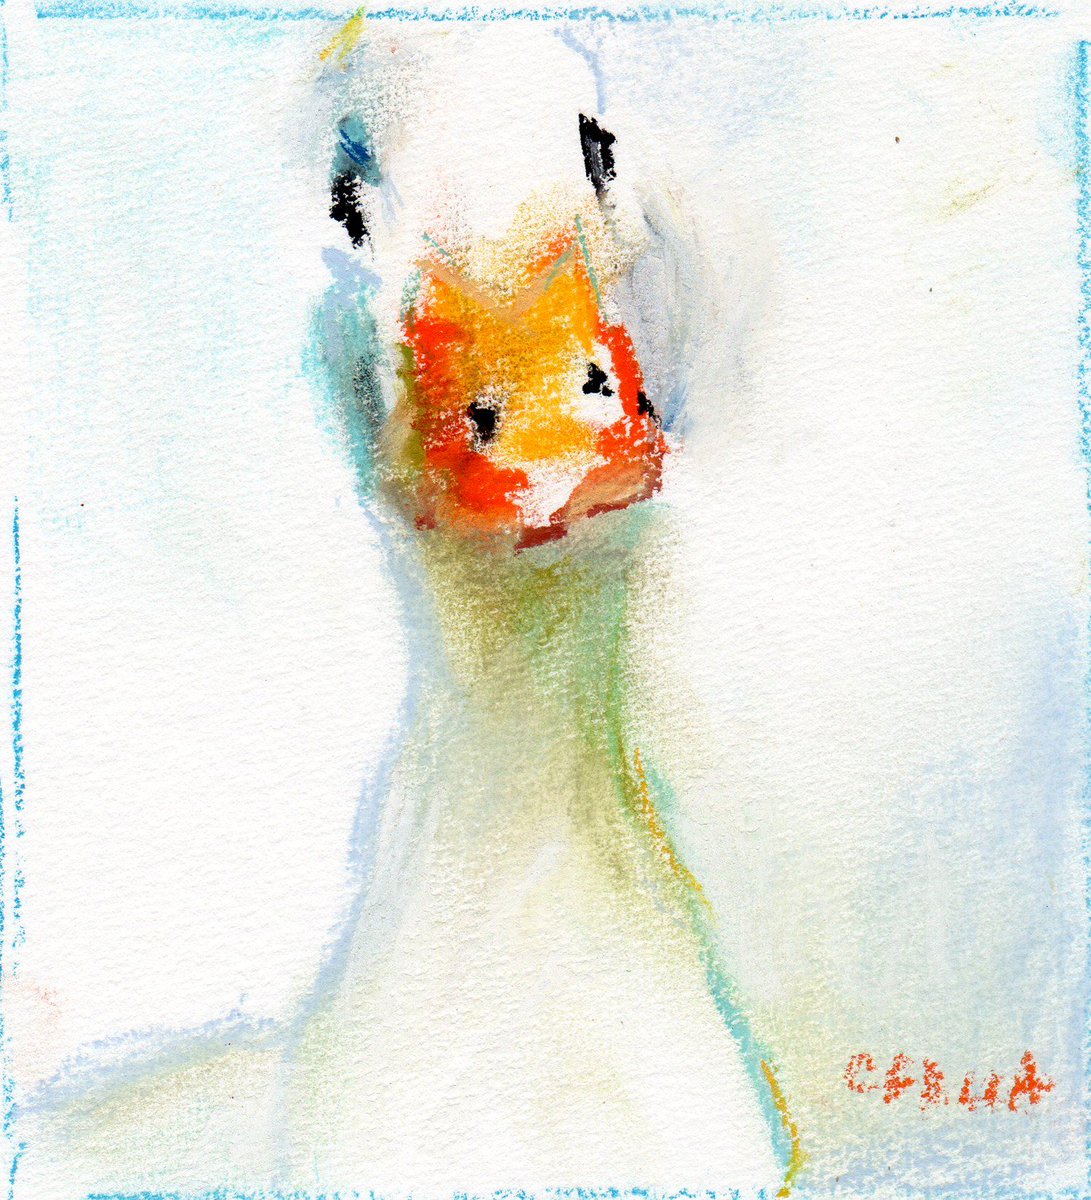 This is 'Graham Quacker' - named for a #whiteduck we had when I was a kid! #pasteldrawing #farmhouseart